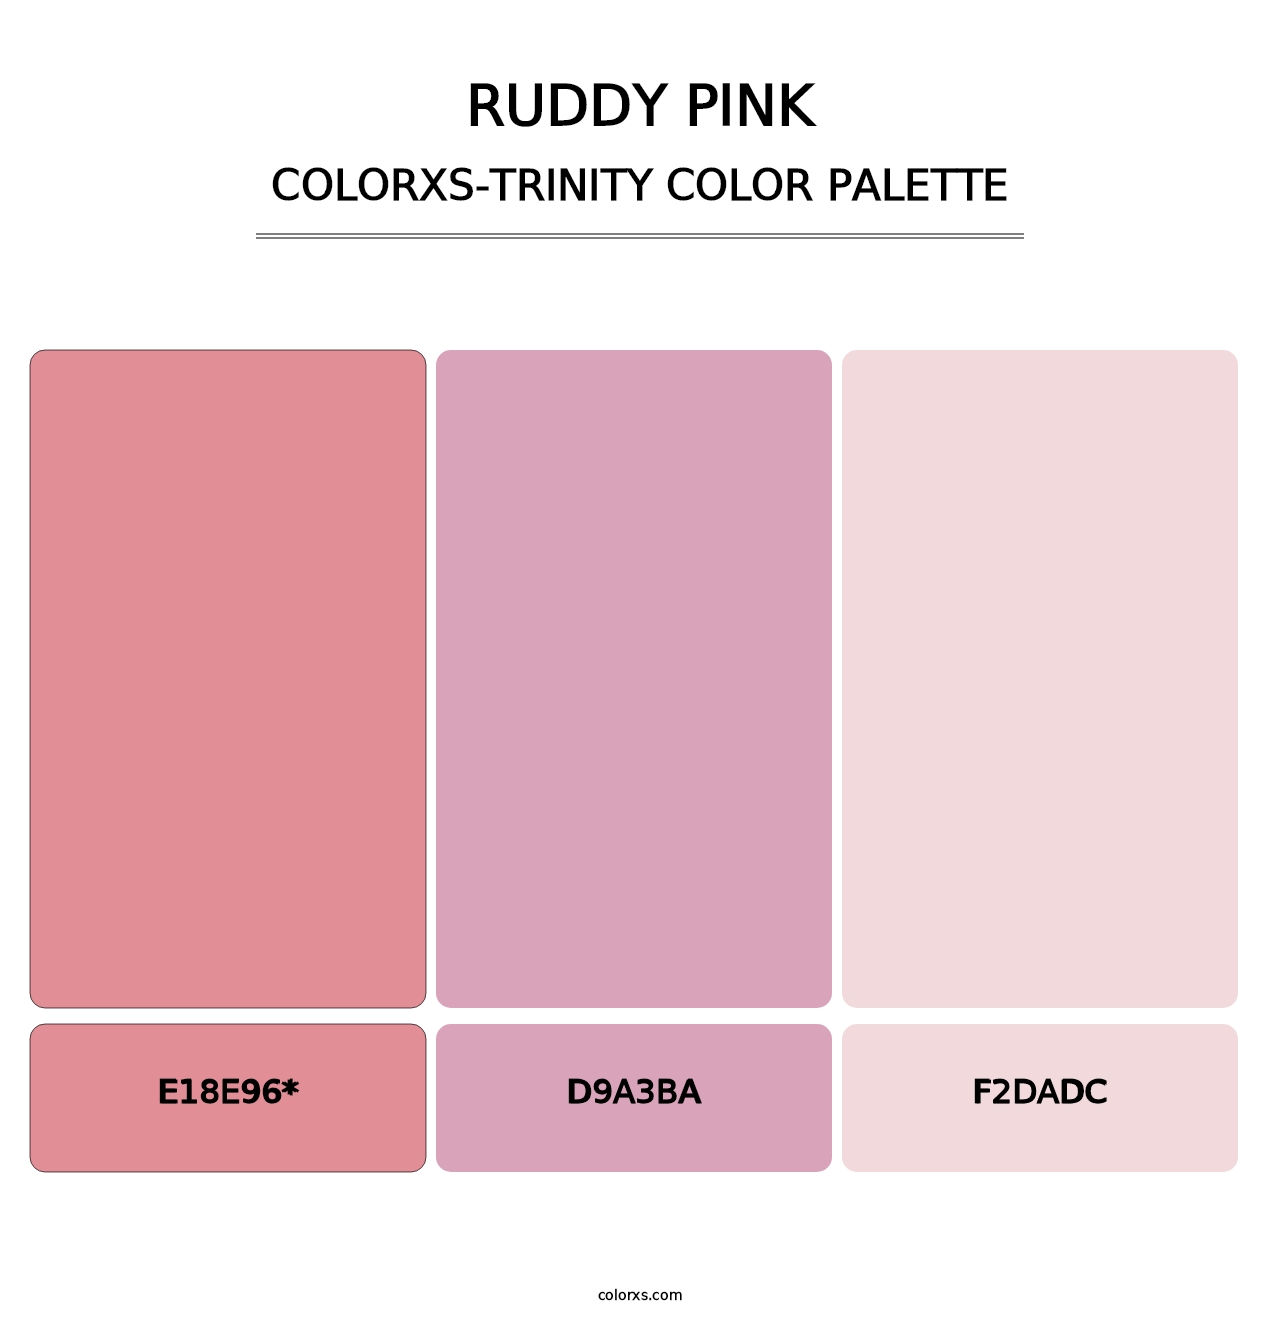 Ruddy Pink - Colorxs Trinity Palette